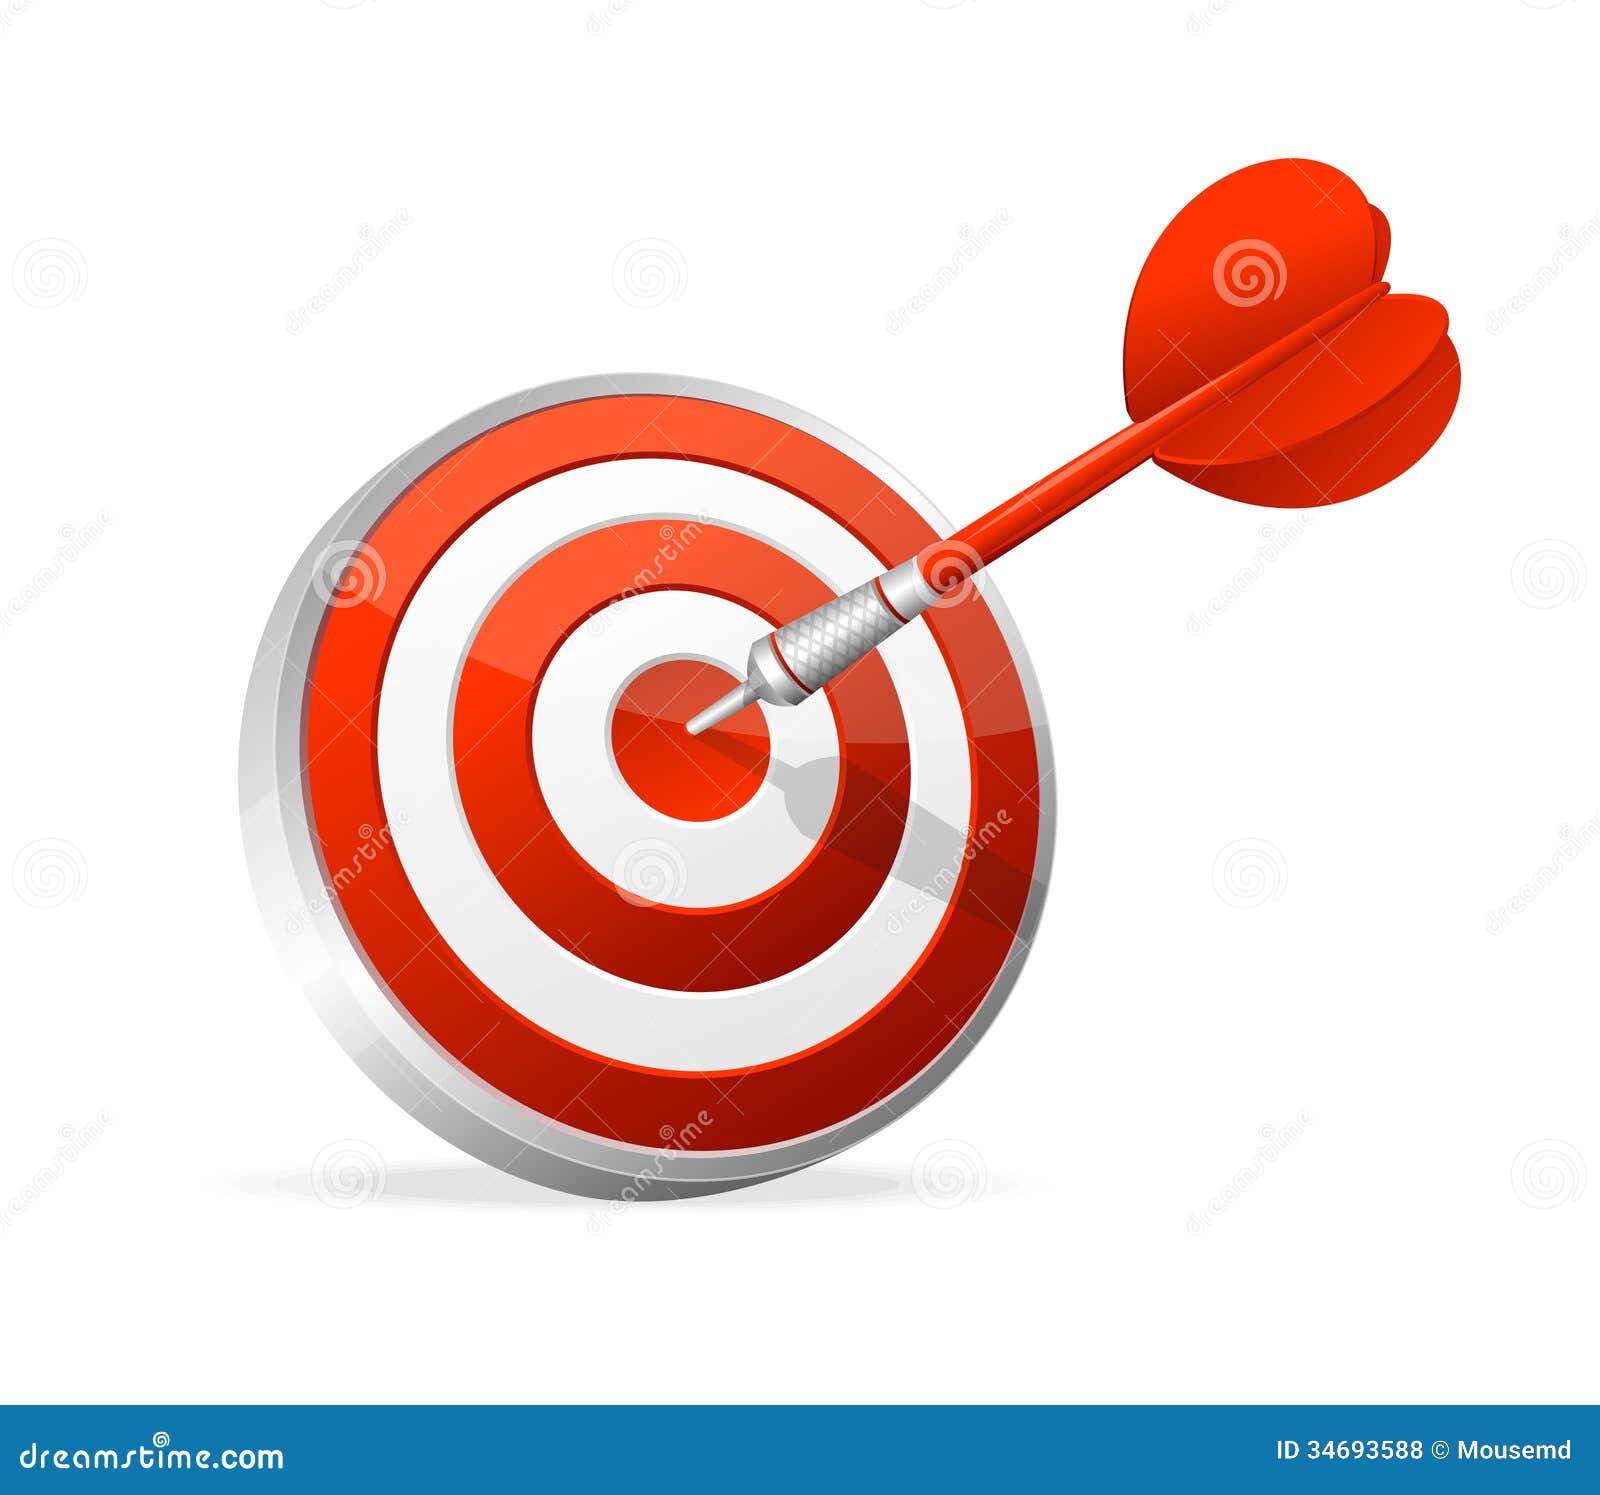 target animated clipart - photo #50